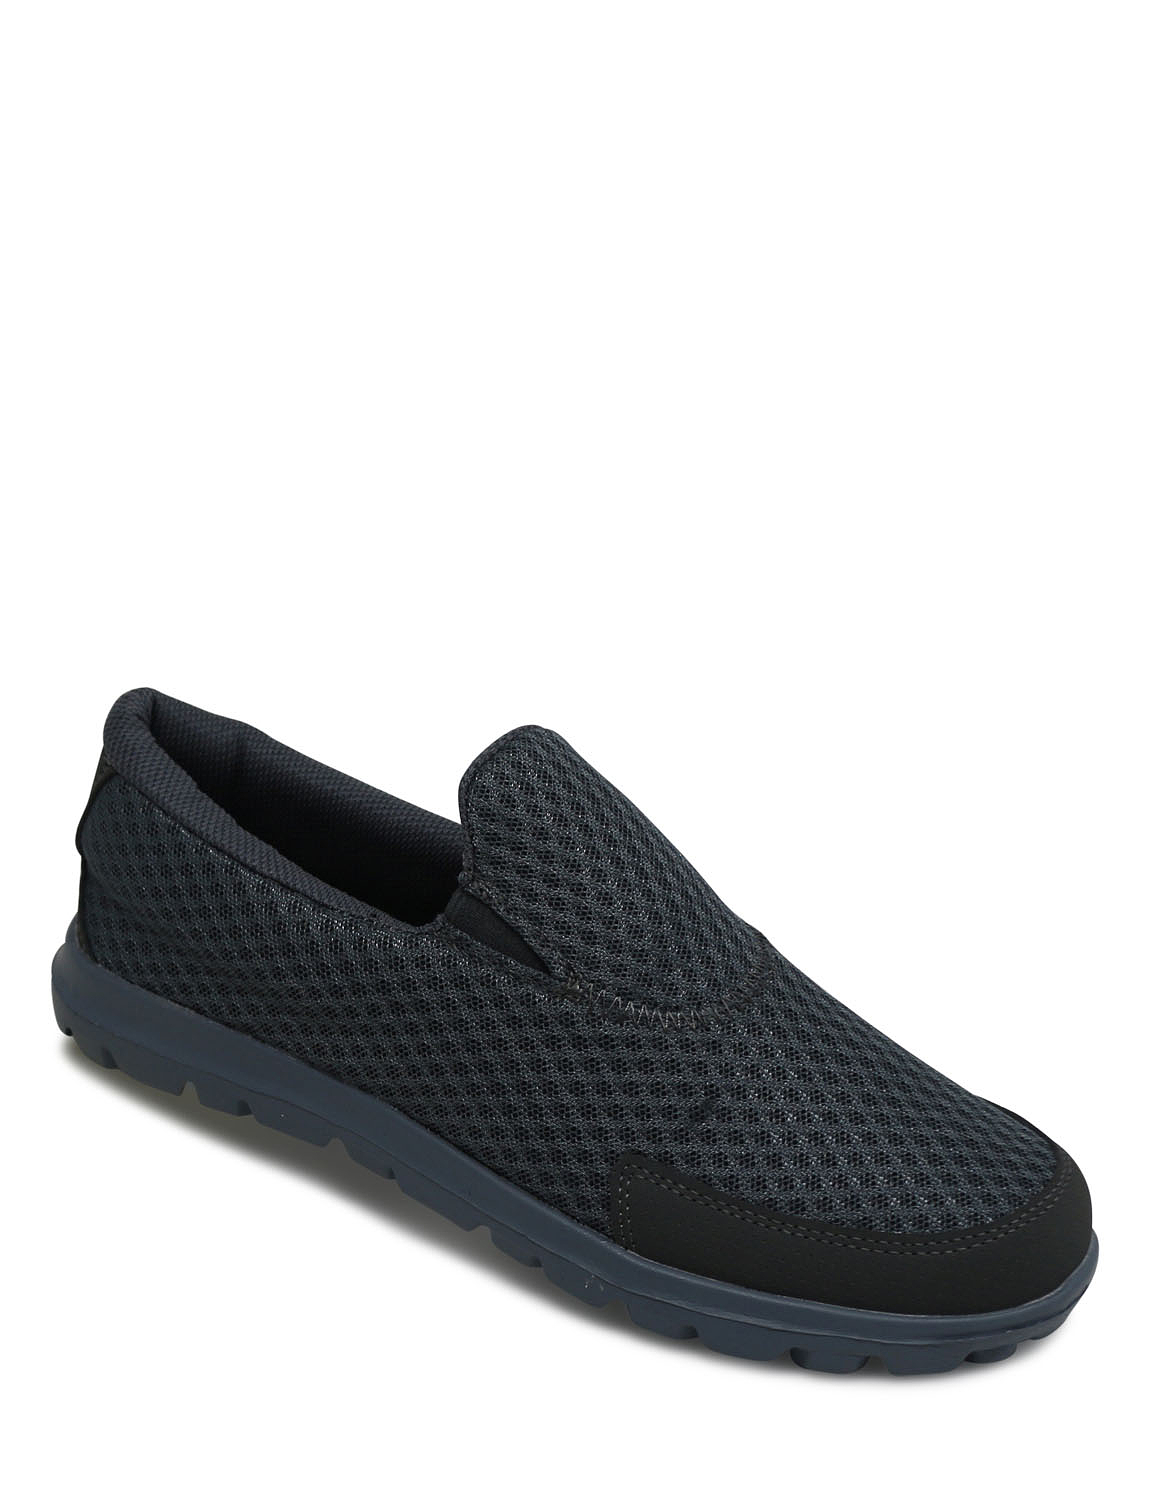 Pegasus Mesh Slip On Trainer Wide Fit | Chums